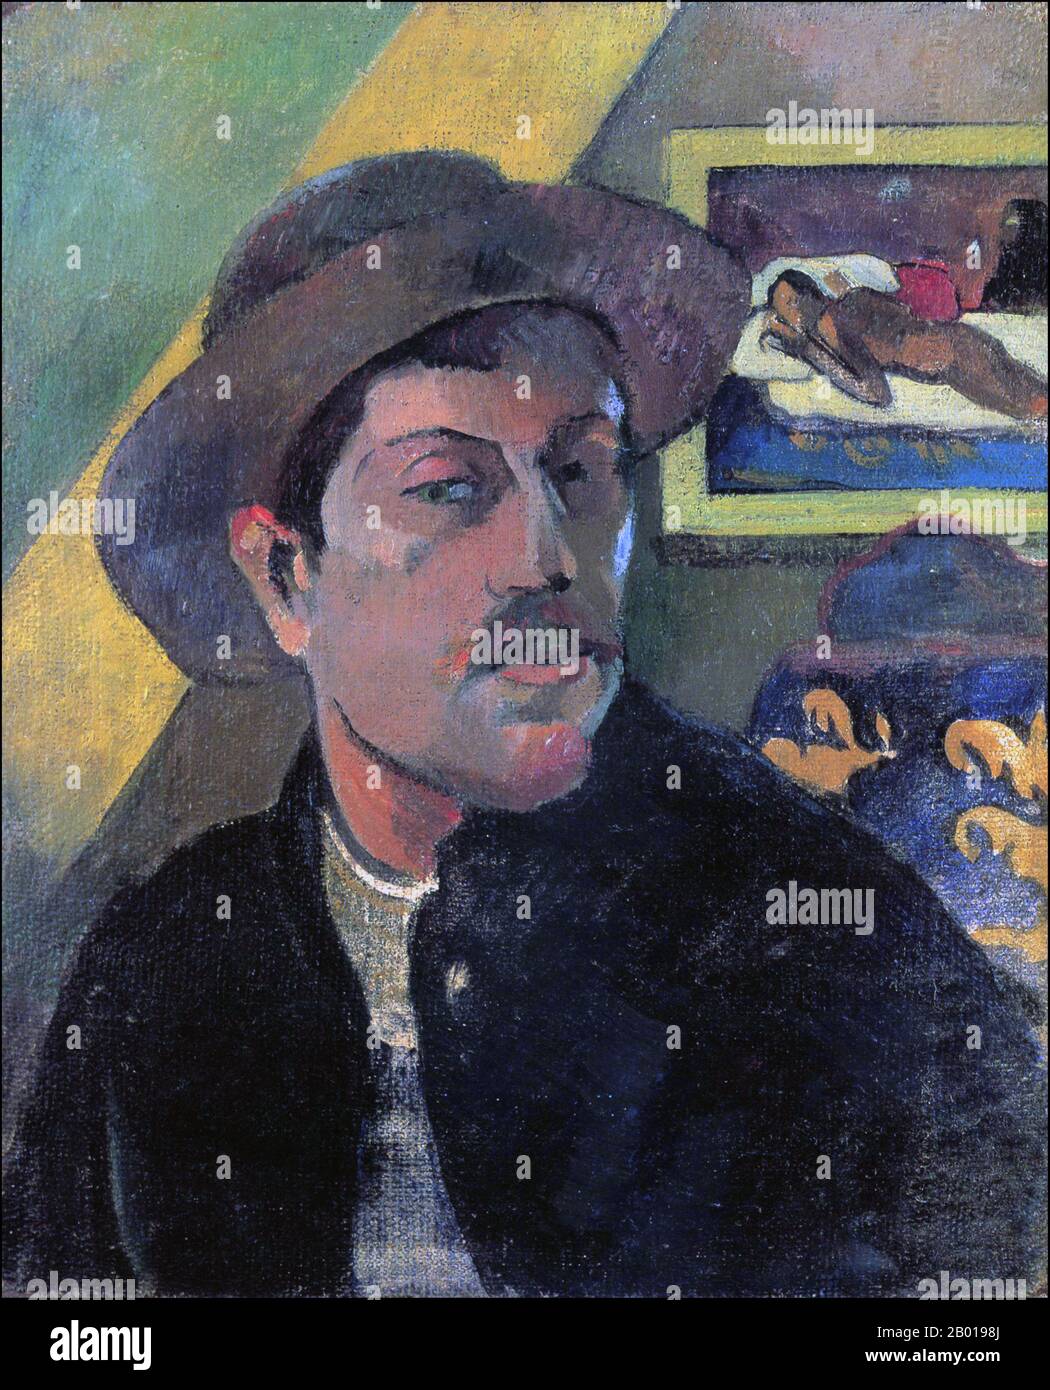 France/Tahiti: 'Self-Portrait in a Hat'. Oil on canvas painting by Paul Gauguin (7 June 1848 - 8 May 1903), 1893.  Paul Gauguin was born in Paris in 1848 and spent some of his childhood in Peru. He worked as a stockbroker with little success, and suffered from bouts of severe depression. He also painted. In 1891, Gauguin, frustrated by lack of recognition at home and financially destitute, sailed to the tropics to escape European civilisation and 'everything that is artificial and conventional'. His time there, particularly in Tahiti and the Marquesas Islands, was the subject of much interest. Stock Photo